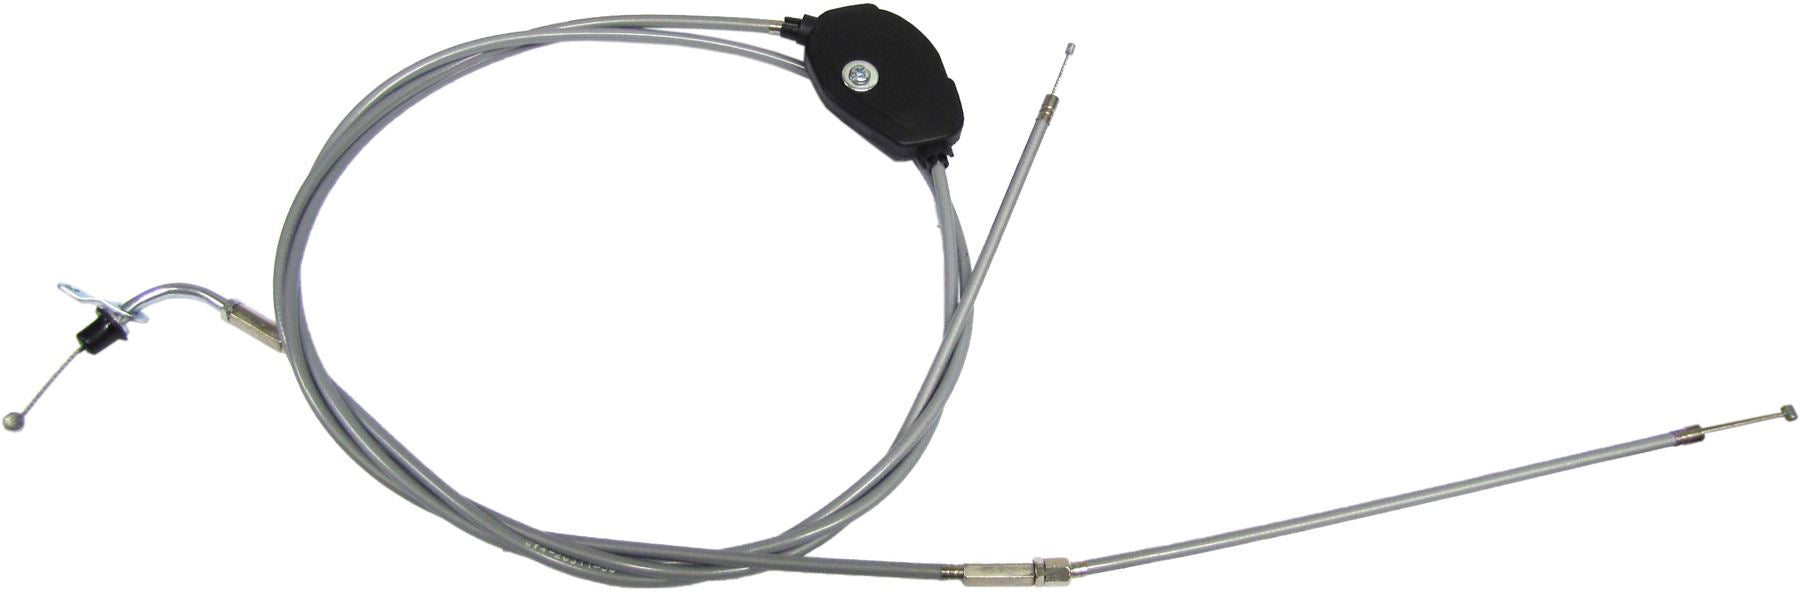 Throttle Cable Fits Yamaha T 80 1983-1996